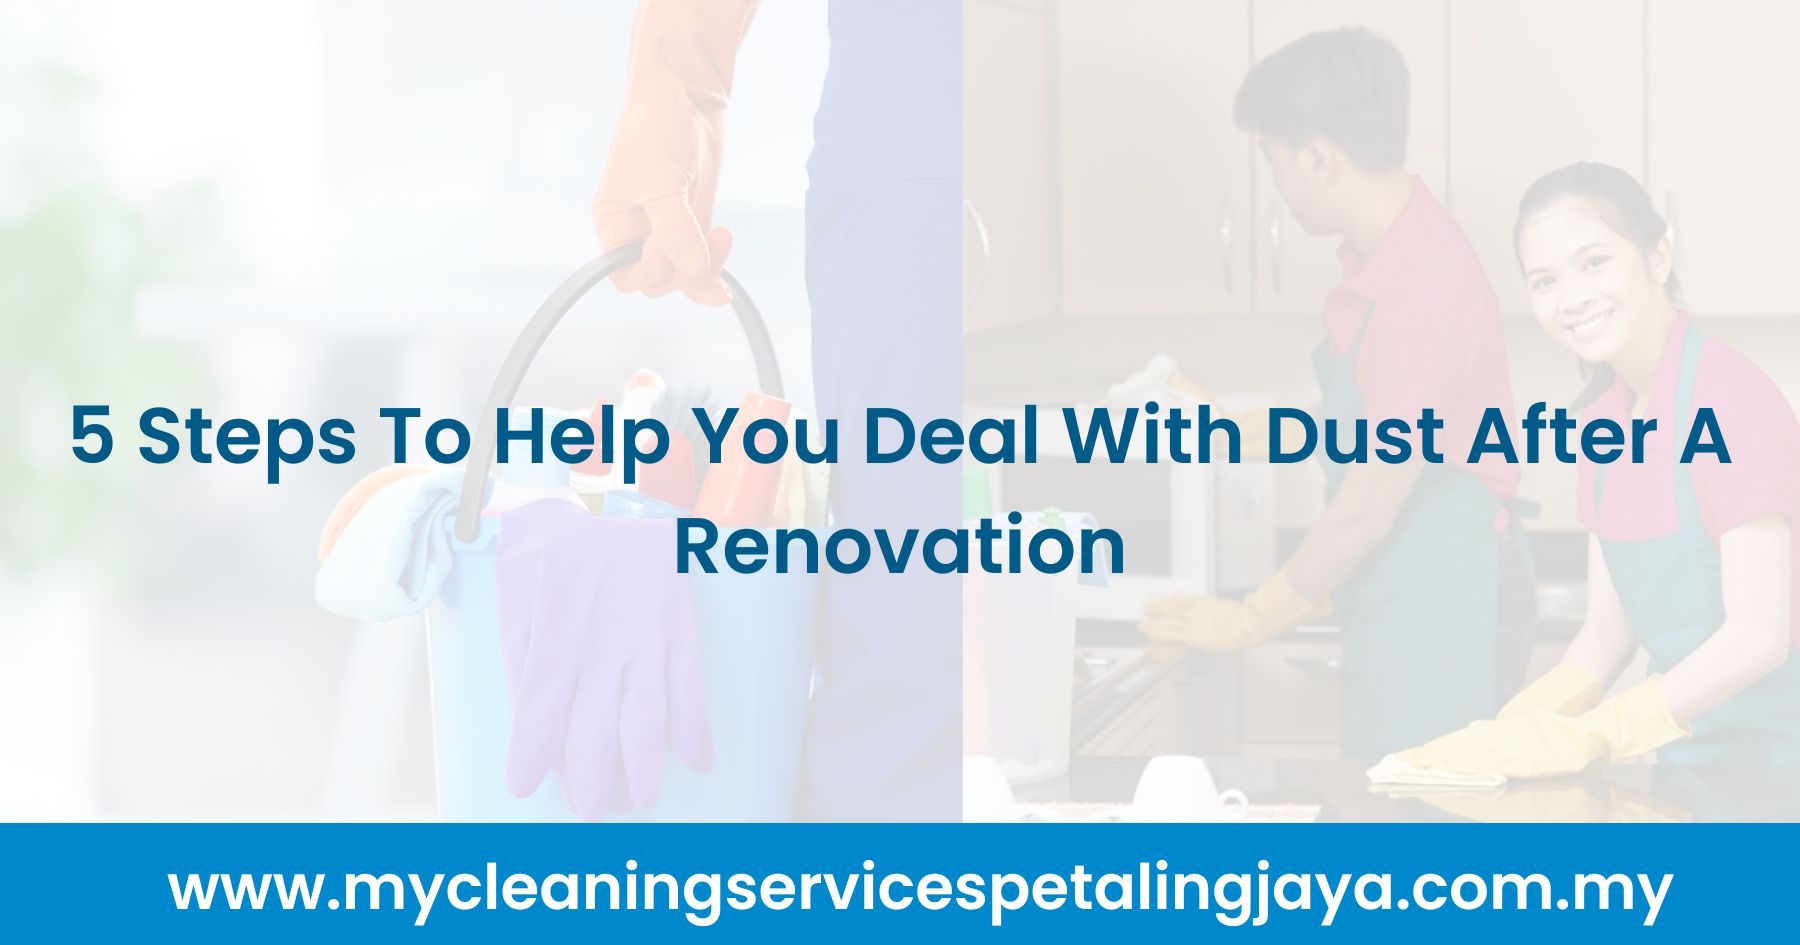 5 Steps To Help You Deal With Dust After A Renovation